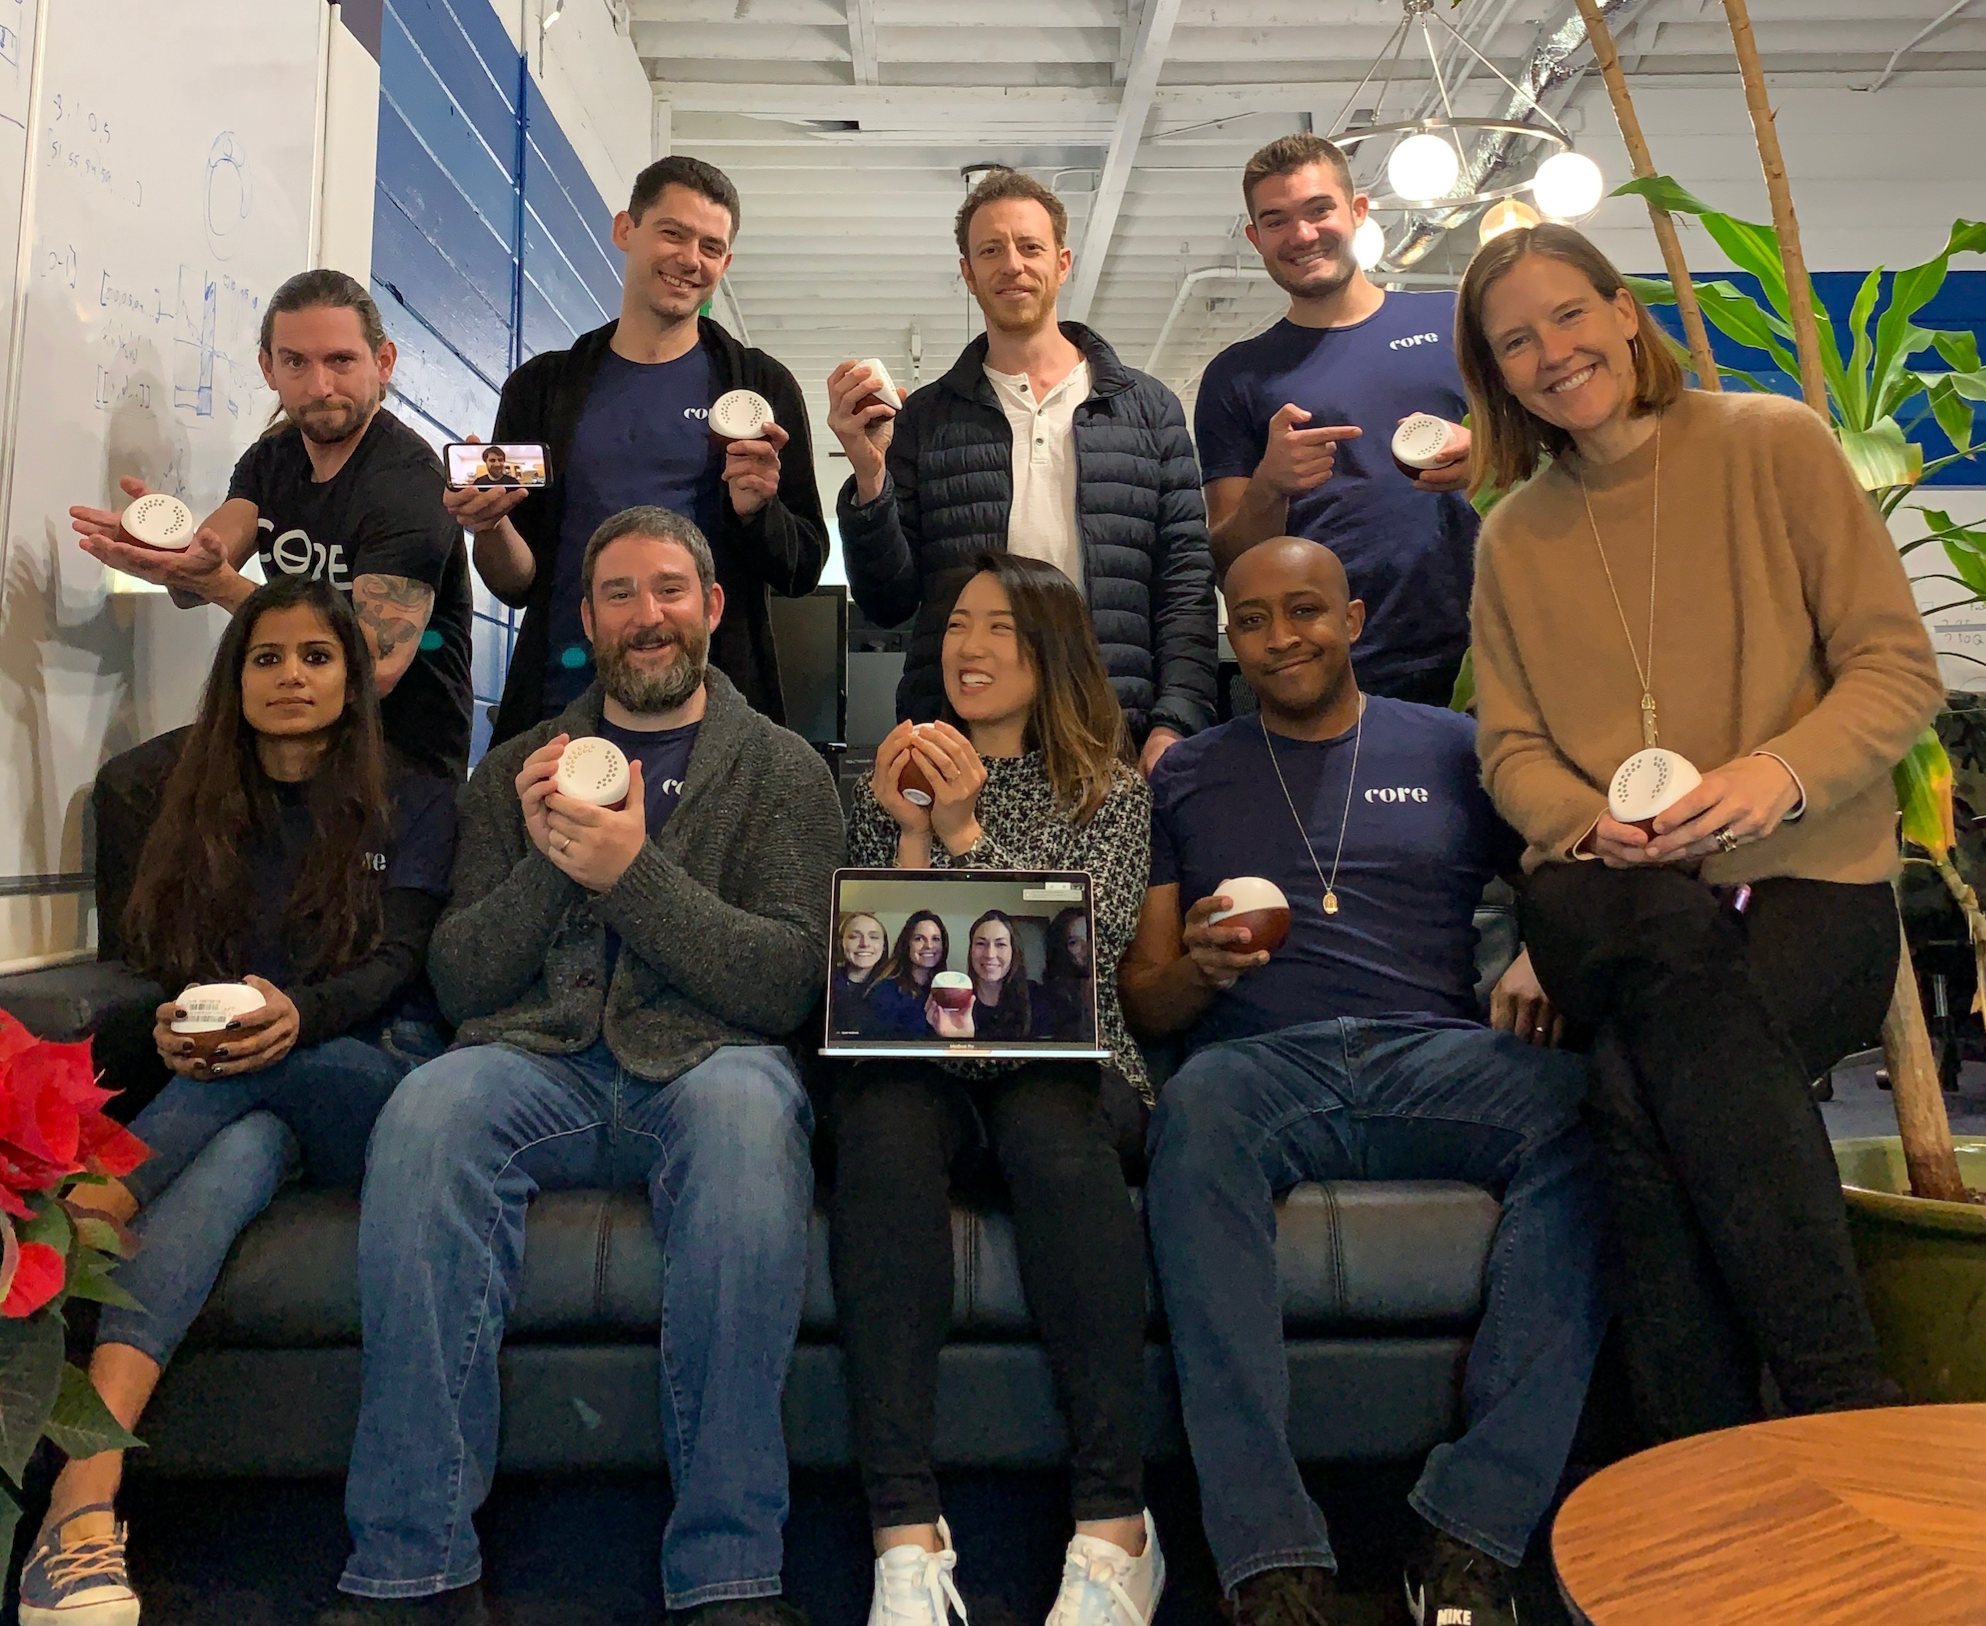 Image of the Core team all proudly holding the first version of the Core product.